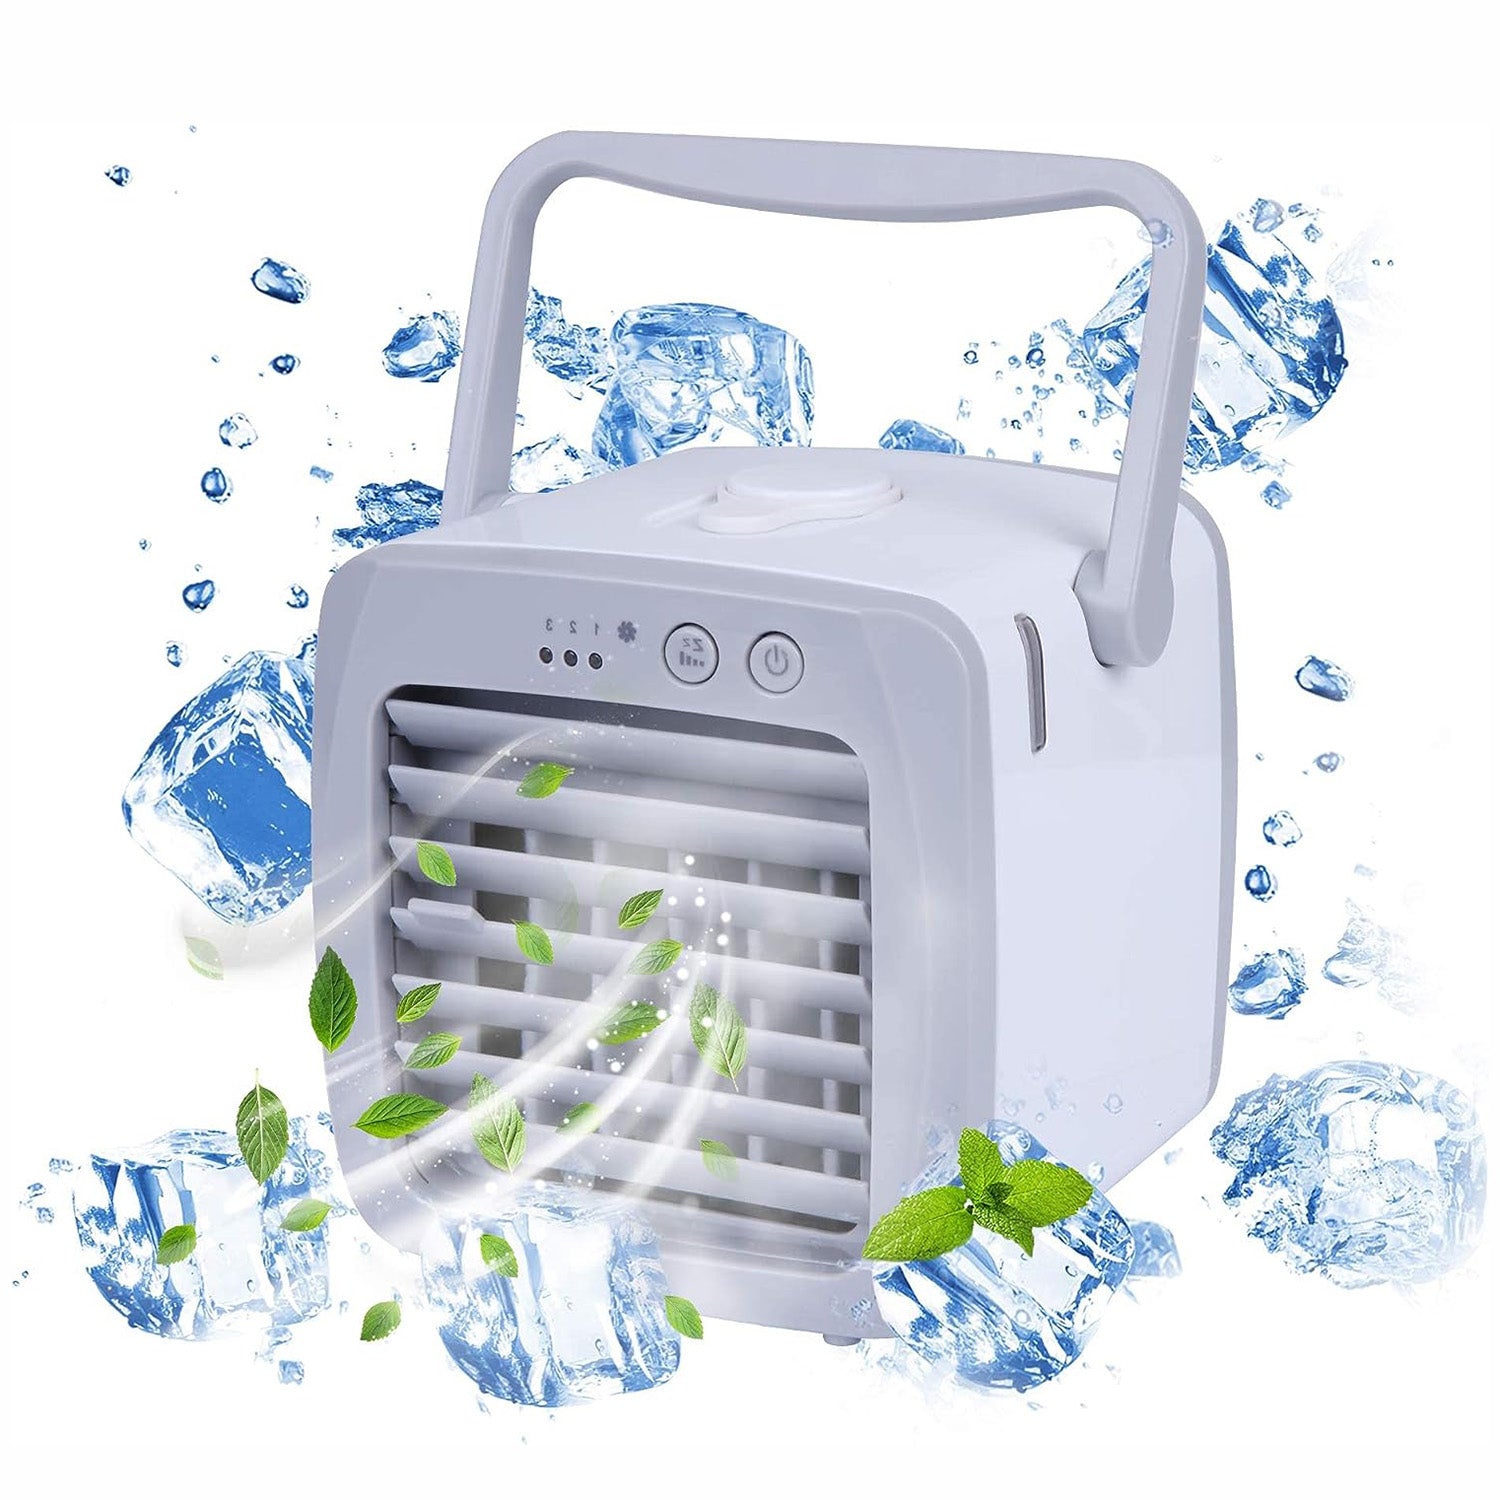 Portable Mini Air Conditioner Fan with Handle Mini Evaporative Air Cooler Cooling Fan